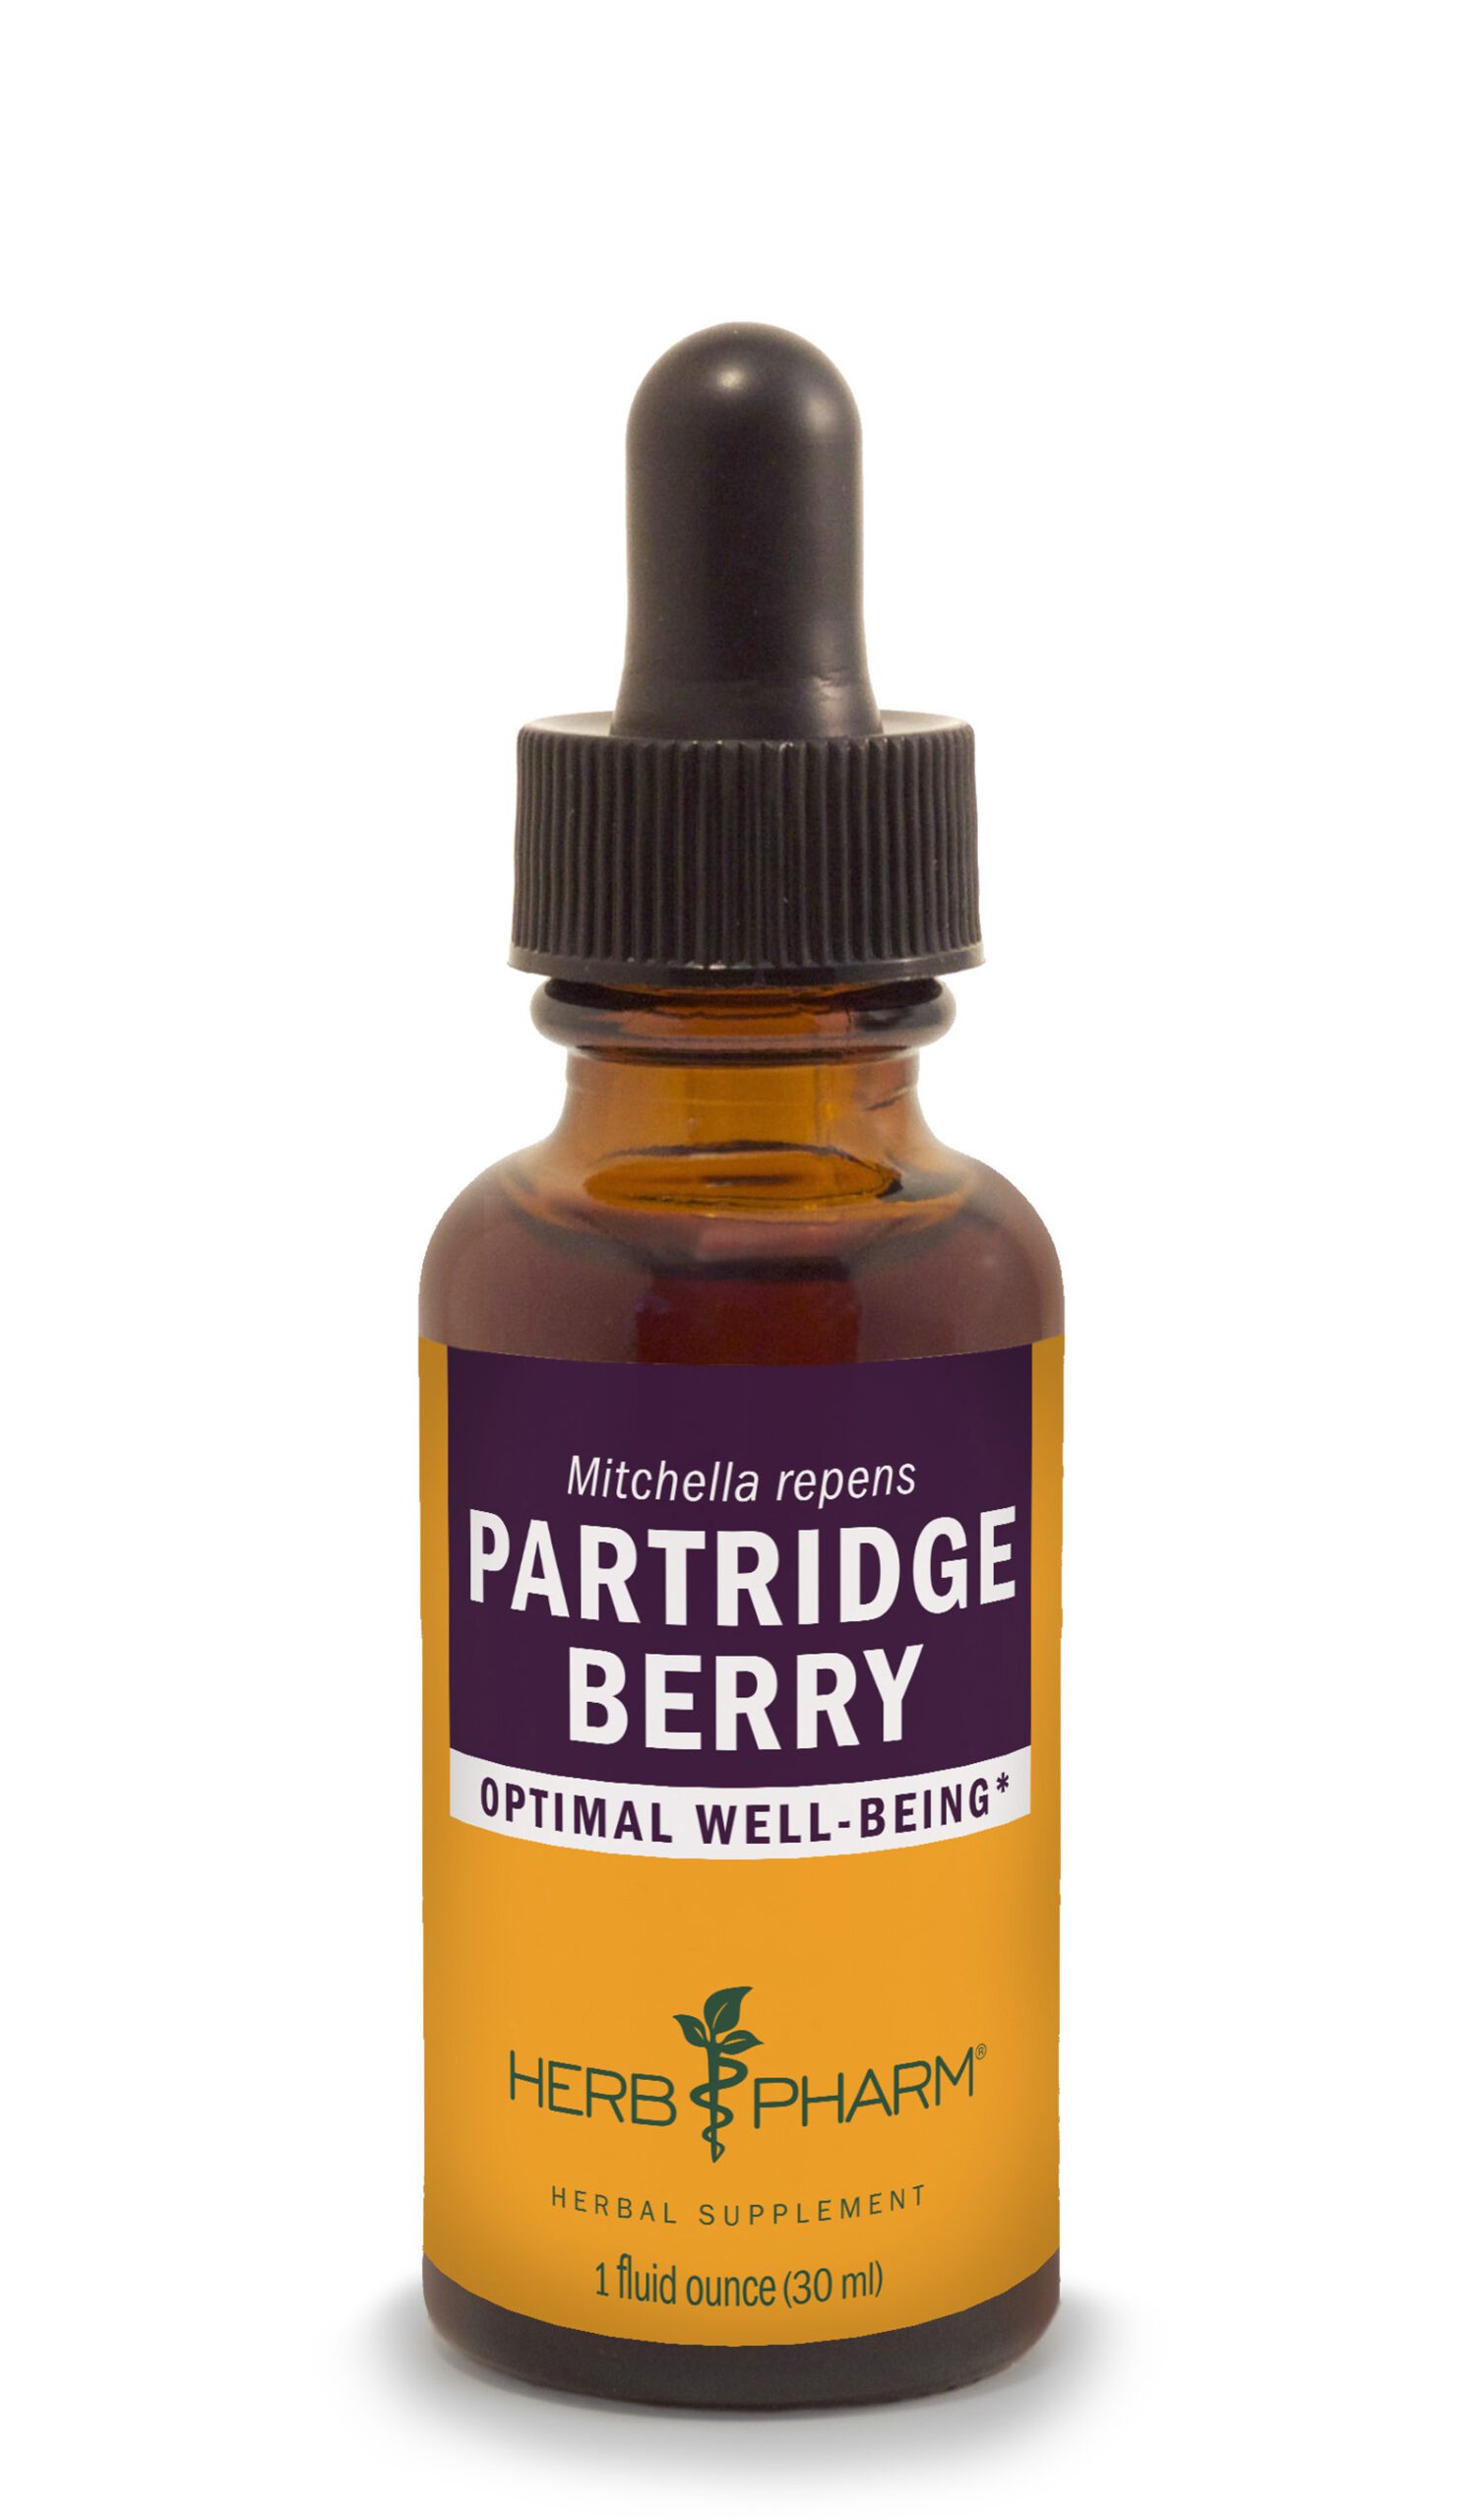 Product Listing Image for Herb Pharm Partridge Berry Tincture 1oz